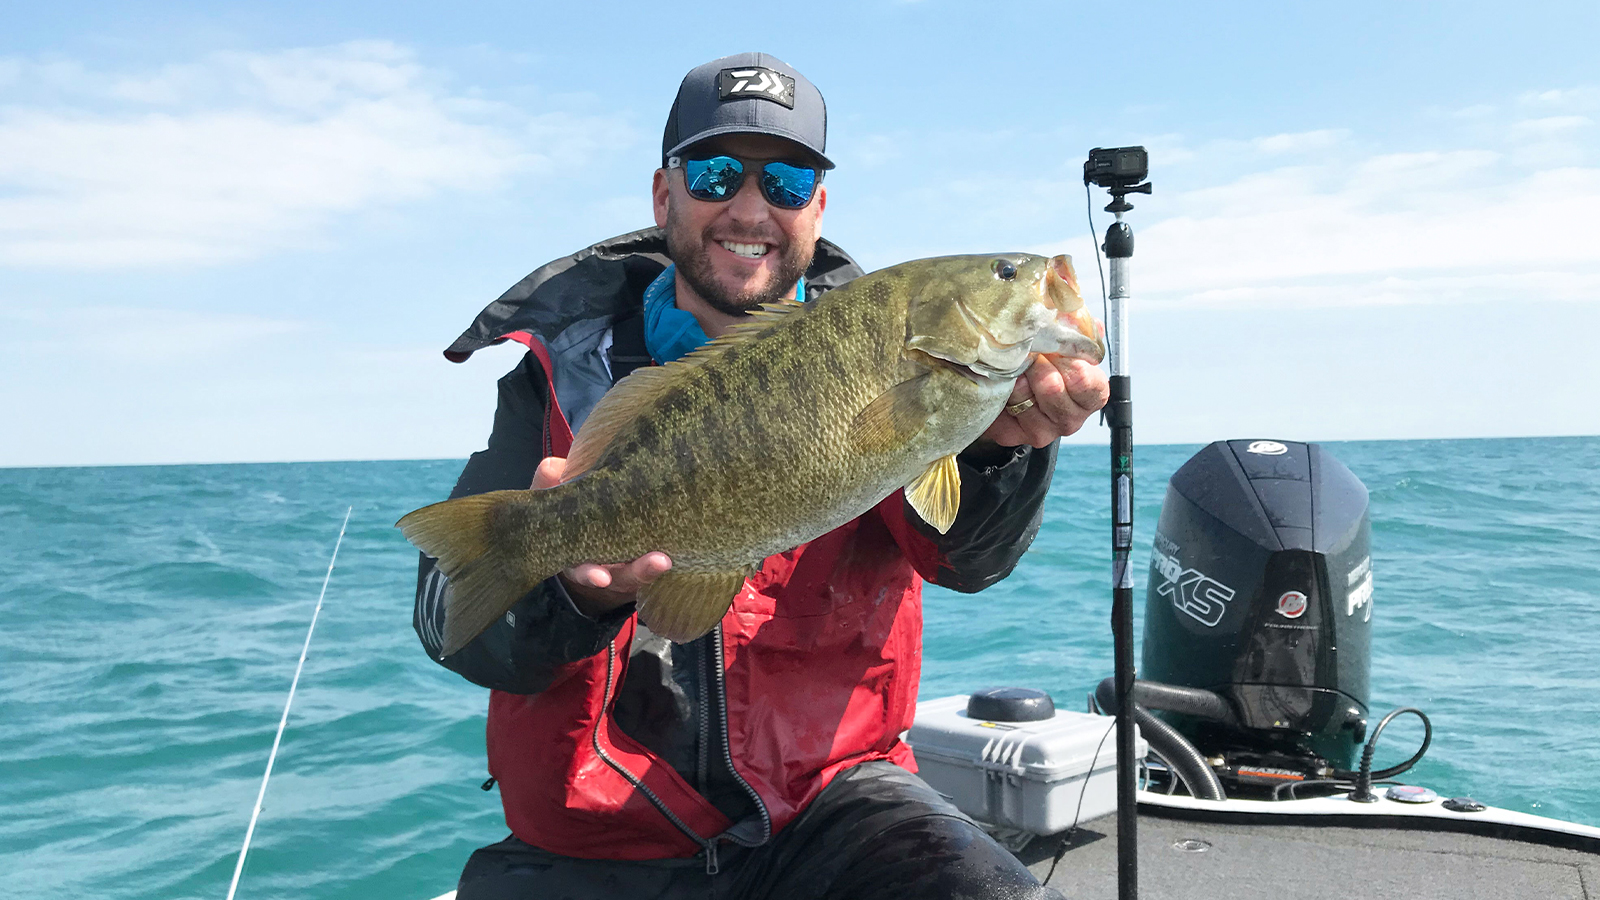 Cody Meyer's Electronics Setup Will Help You Catch More Bass